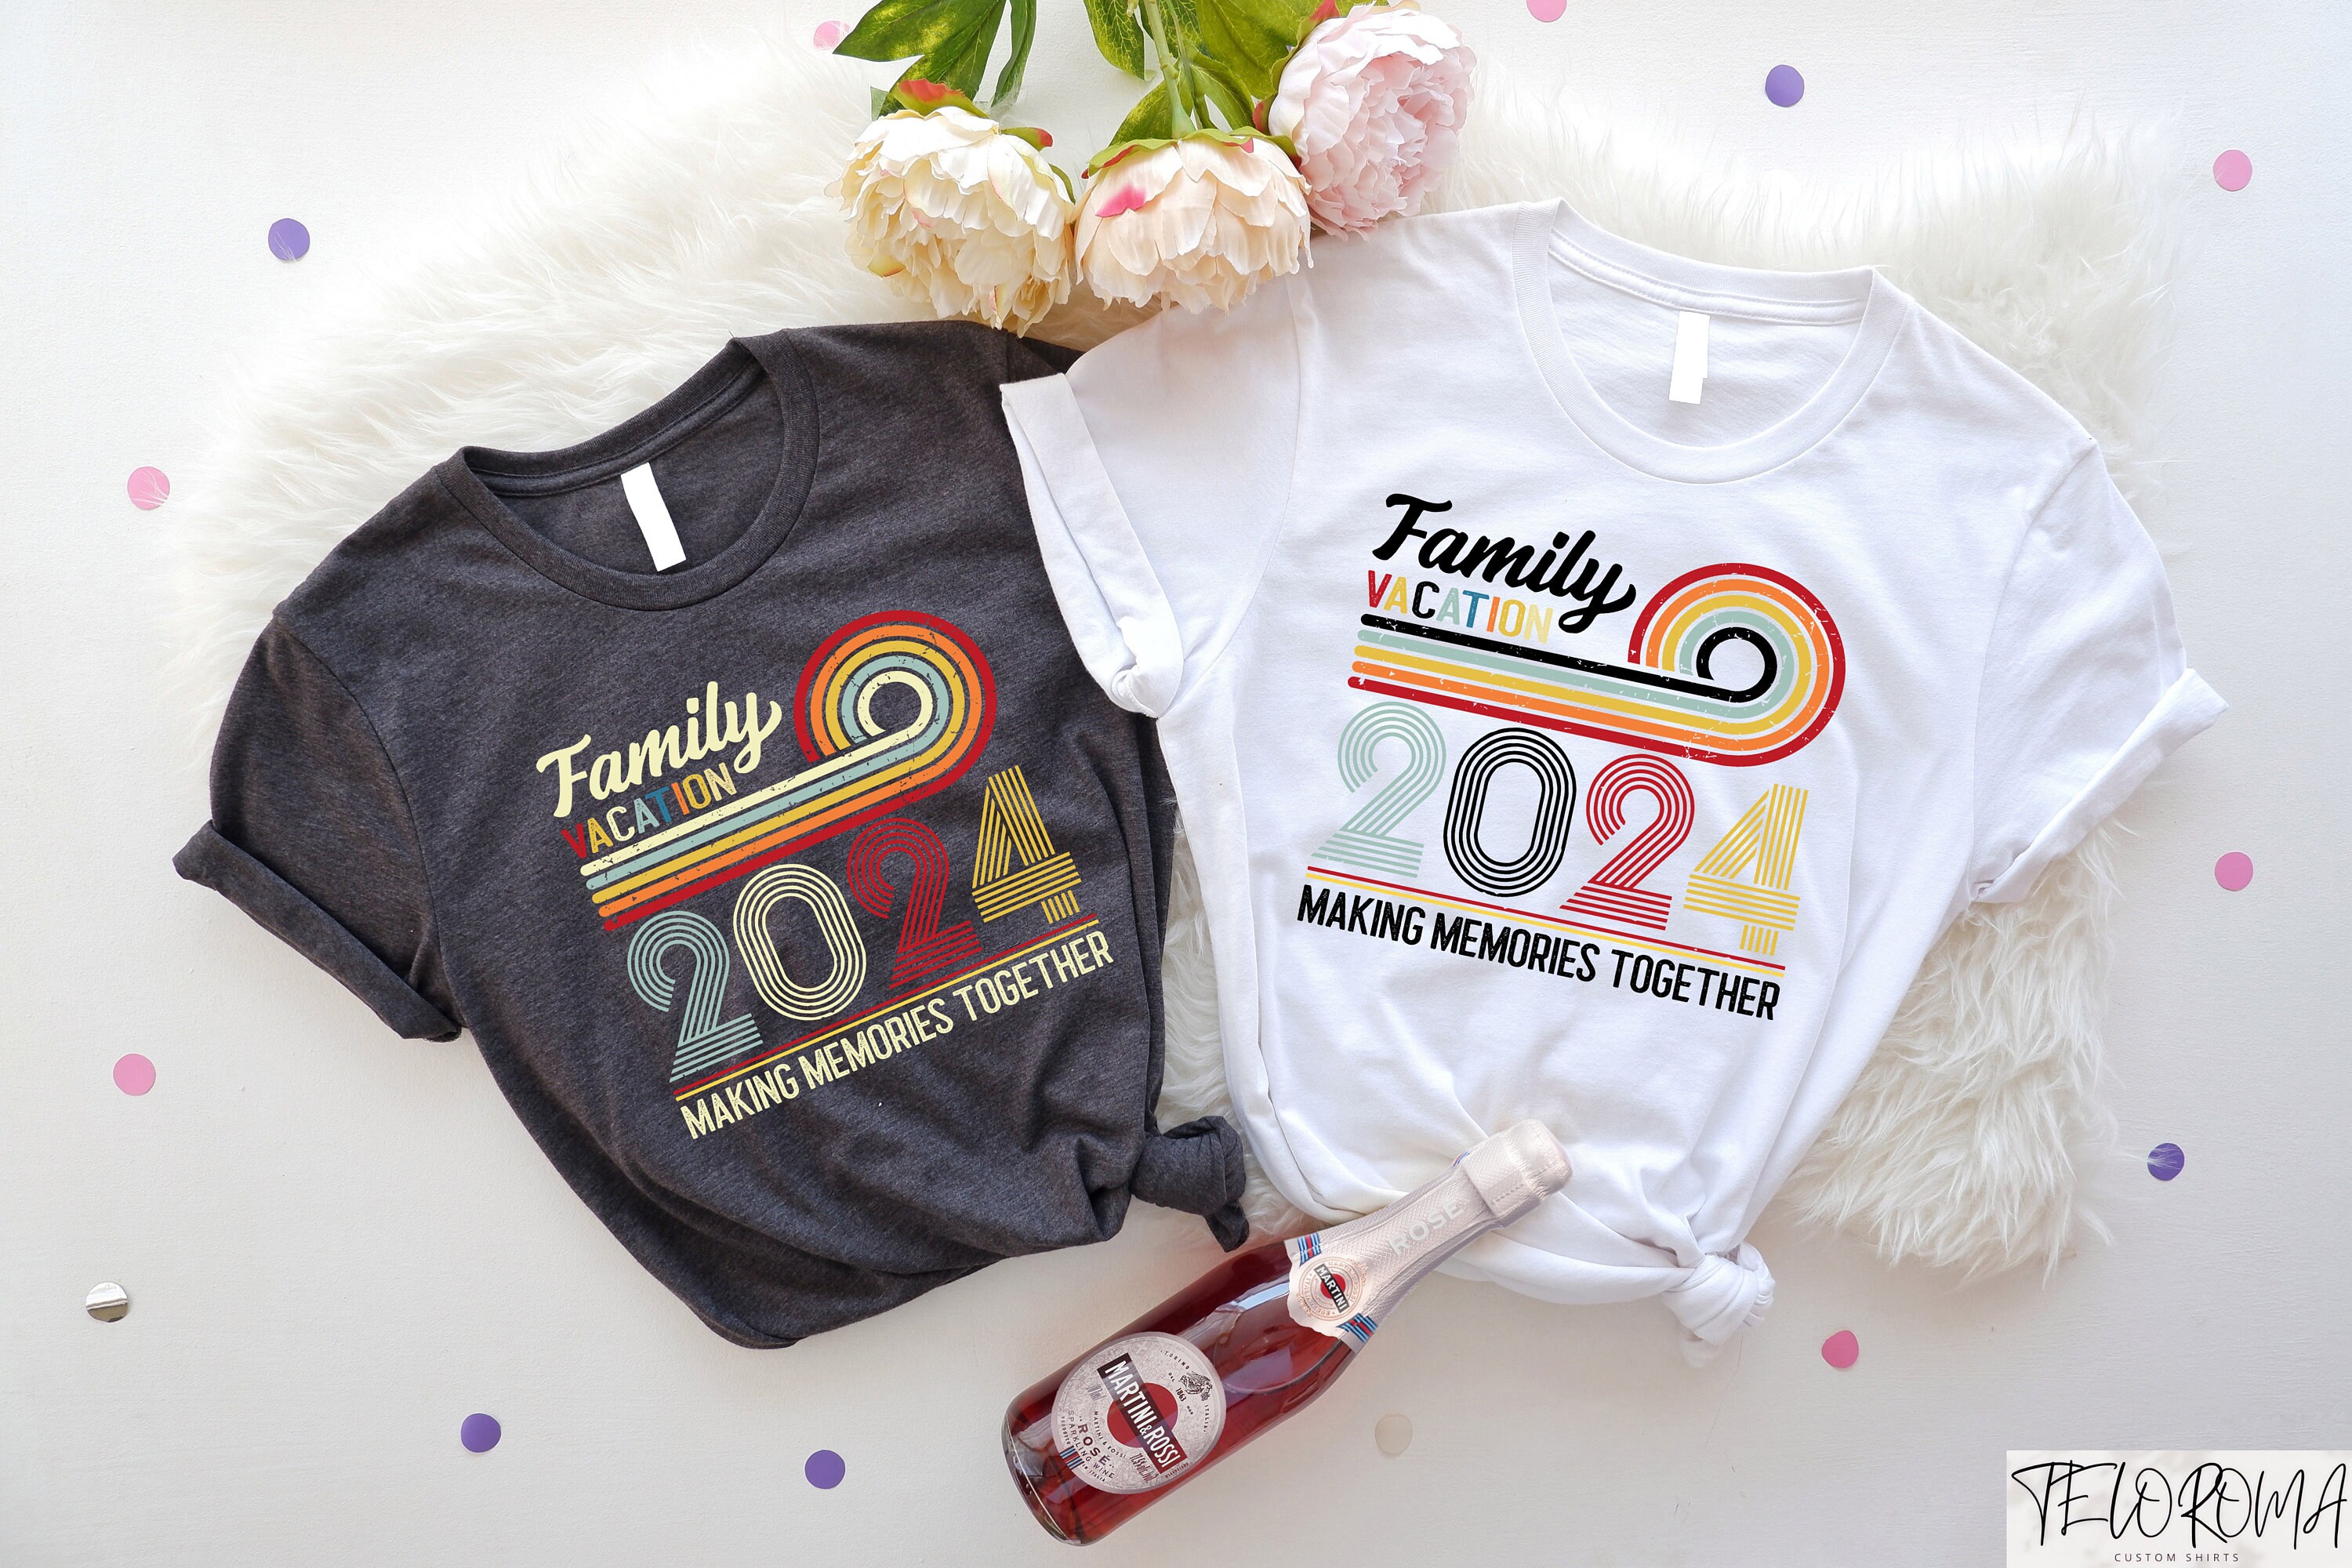 Discover Family Vacation 2024 Tshirt, Making Memories Together Shirt, Family Cruise Shirt, Family Beach Trip Shirt, Summer Family Vacation Tshirts